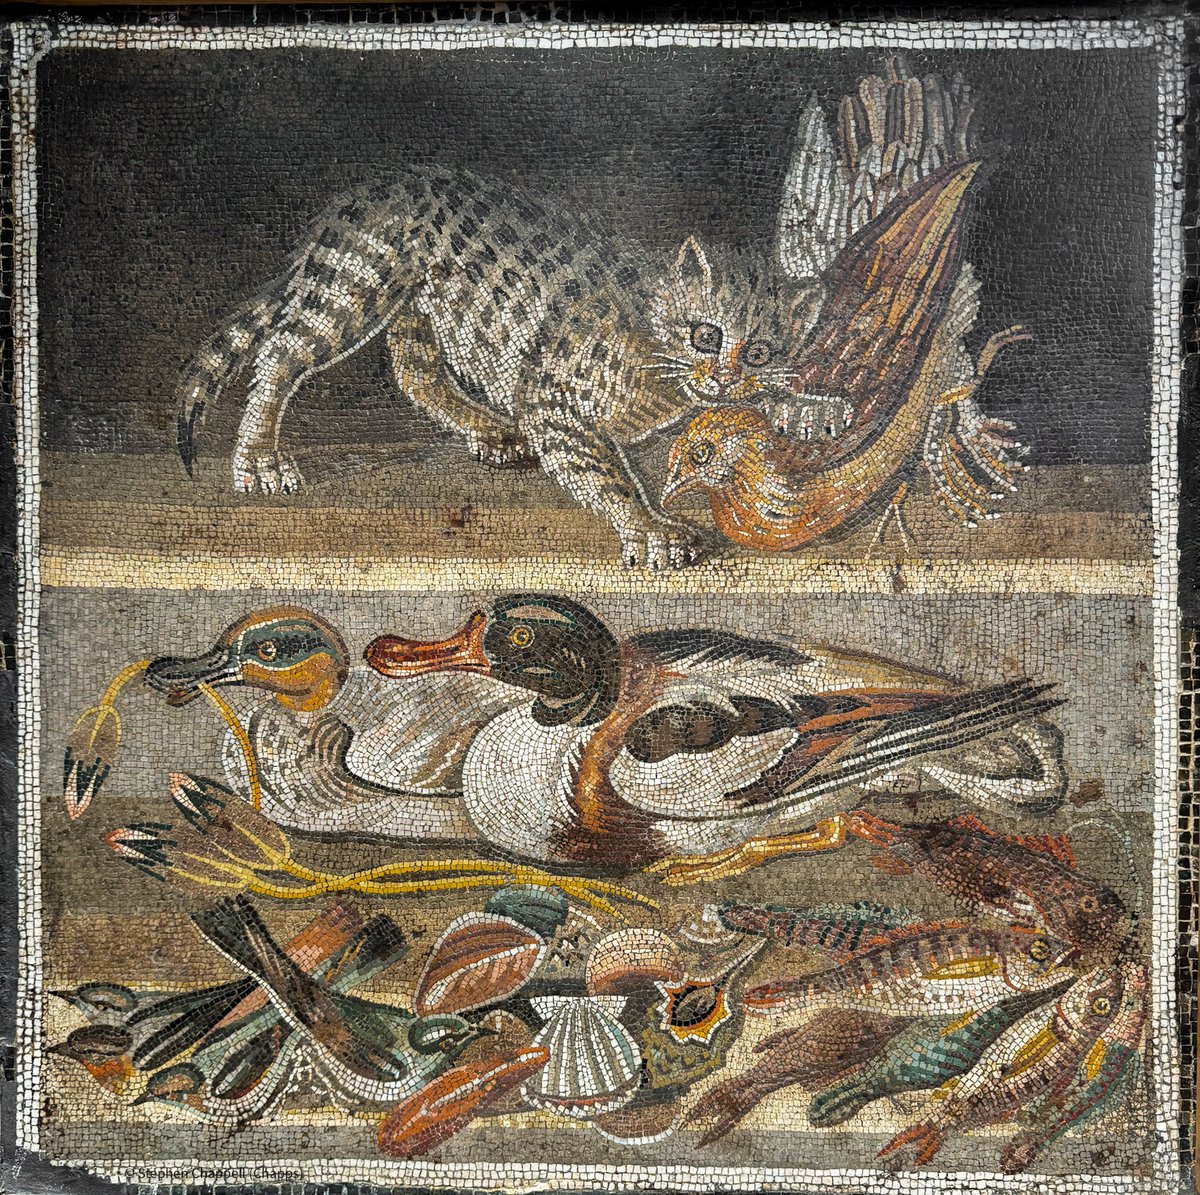 For #MosaicMonday, this rather famous mosaic depicting a cat catching a partridge in the upper register, and the food in the pantry below: ducks, shellfish, fish, and birds (finches?).

House of the Faun, #Pompeii. At the #MANN (inv. 9993).

📸 me